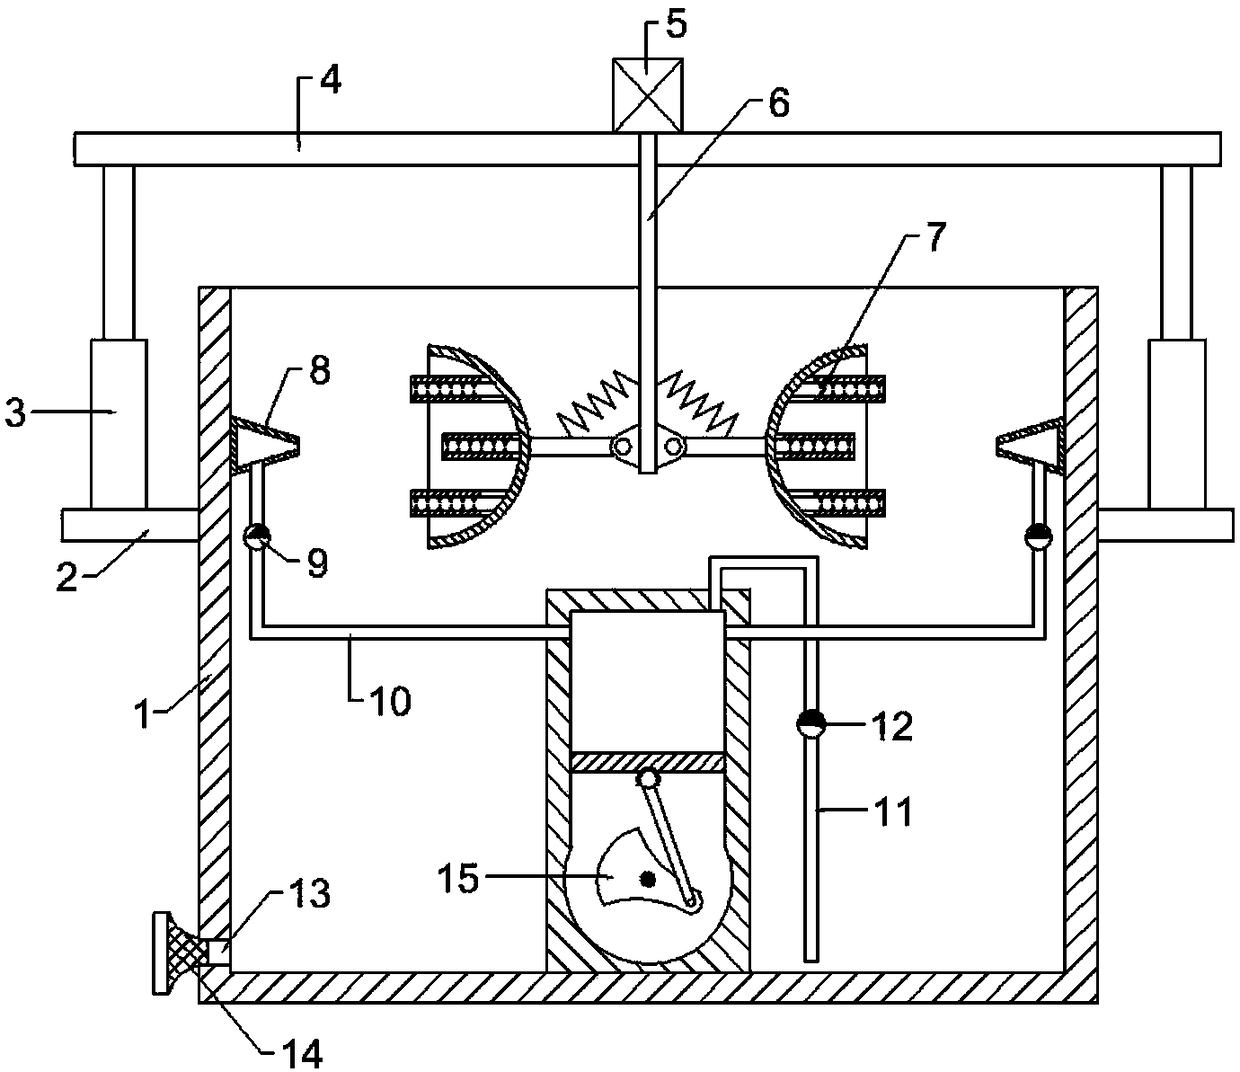 Environment-friendly sewage treatment equipment based on rotary convection principle